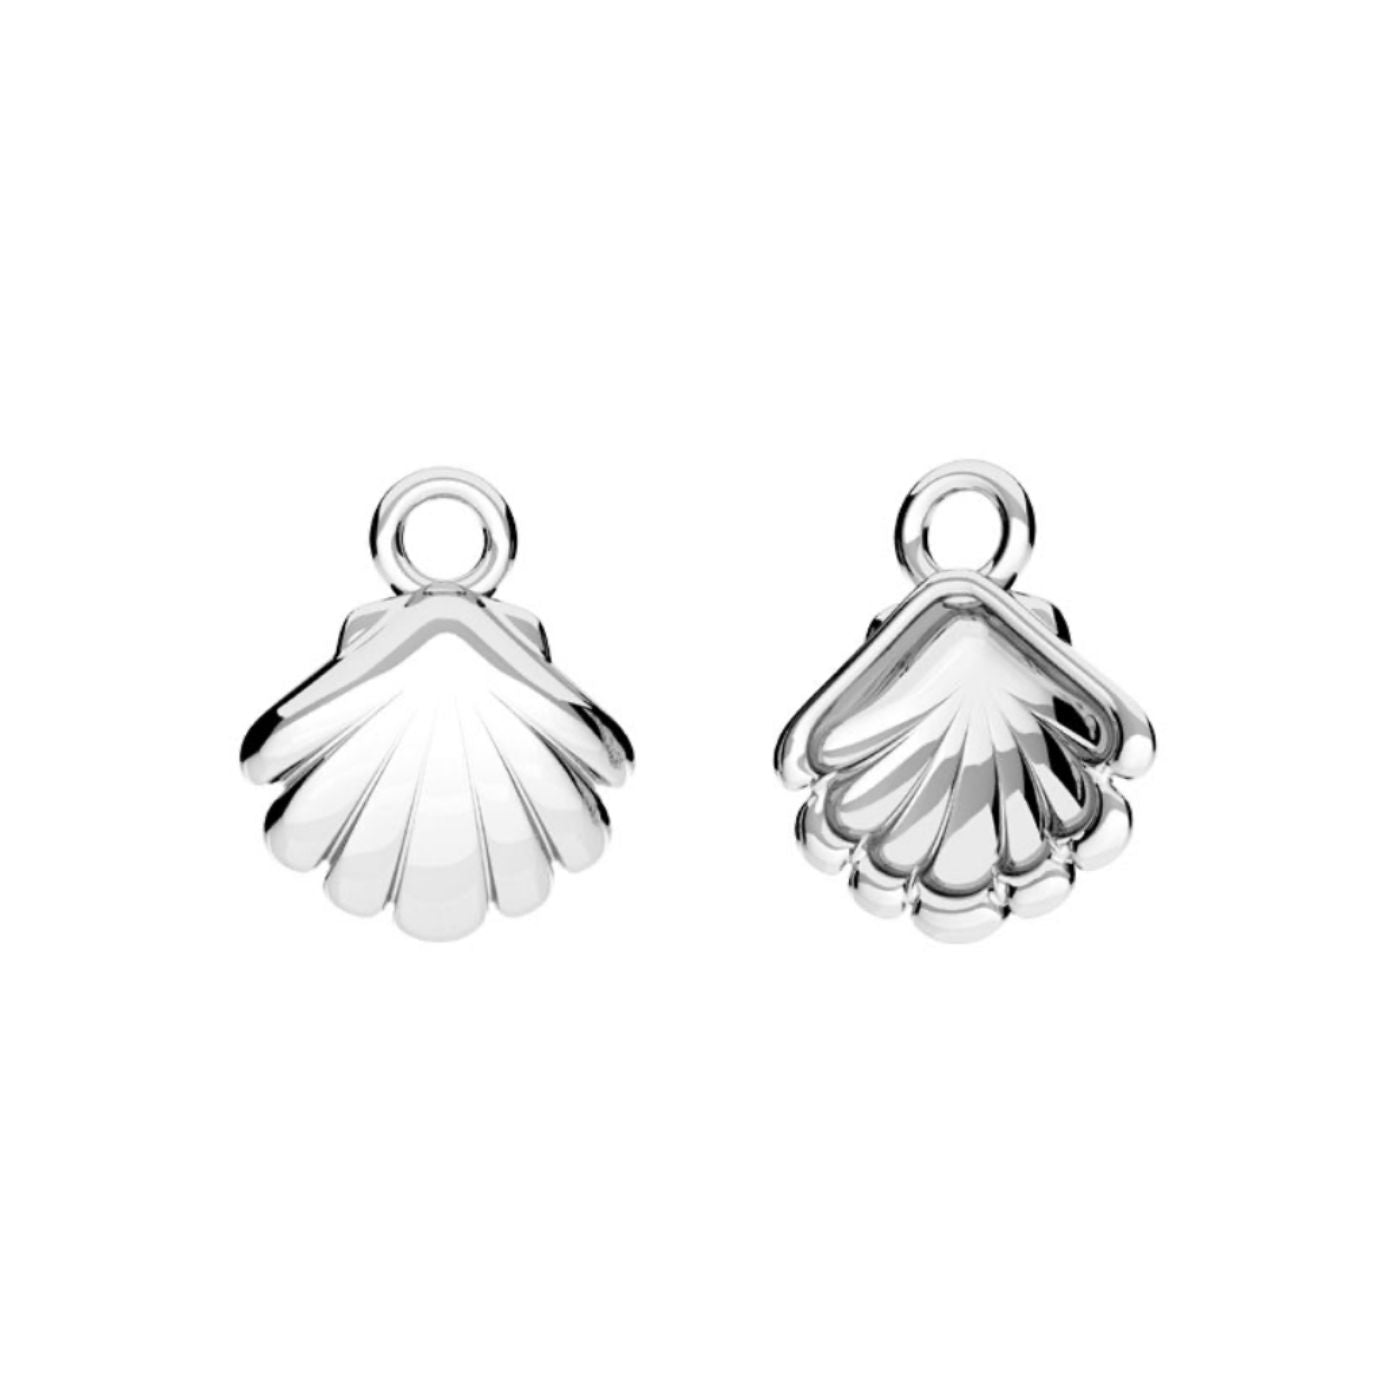 .925 Sterling Silver Charms - Charm Collection (Sold per Piece)